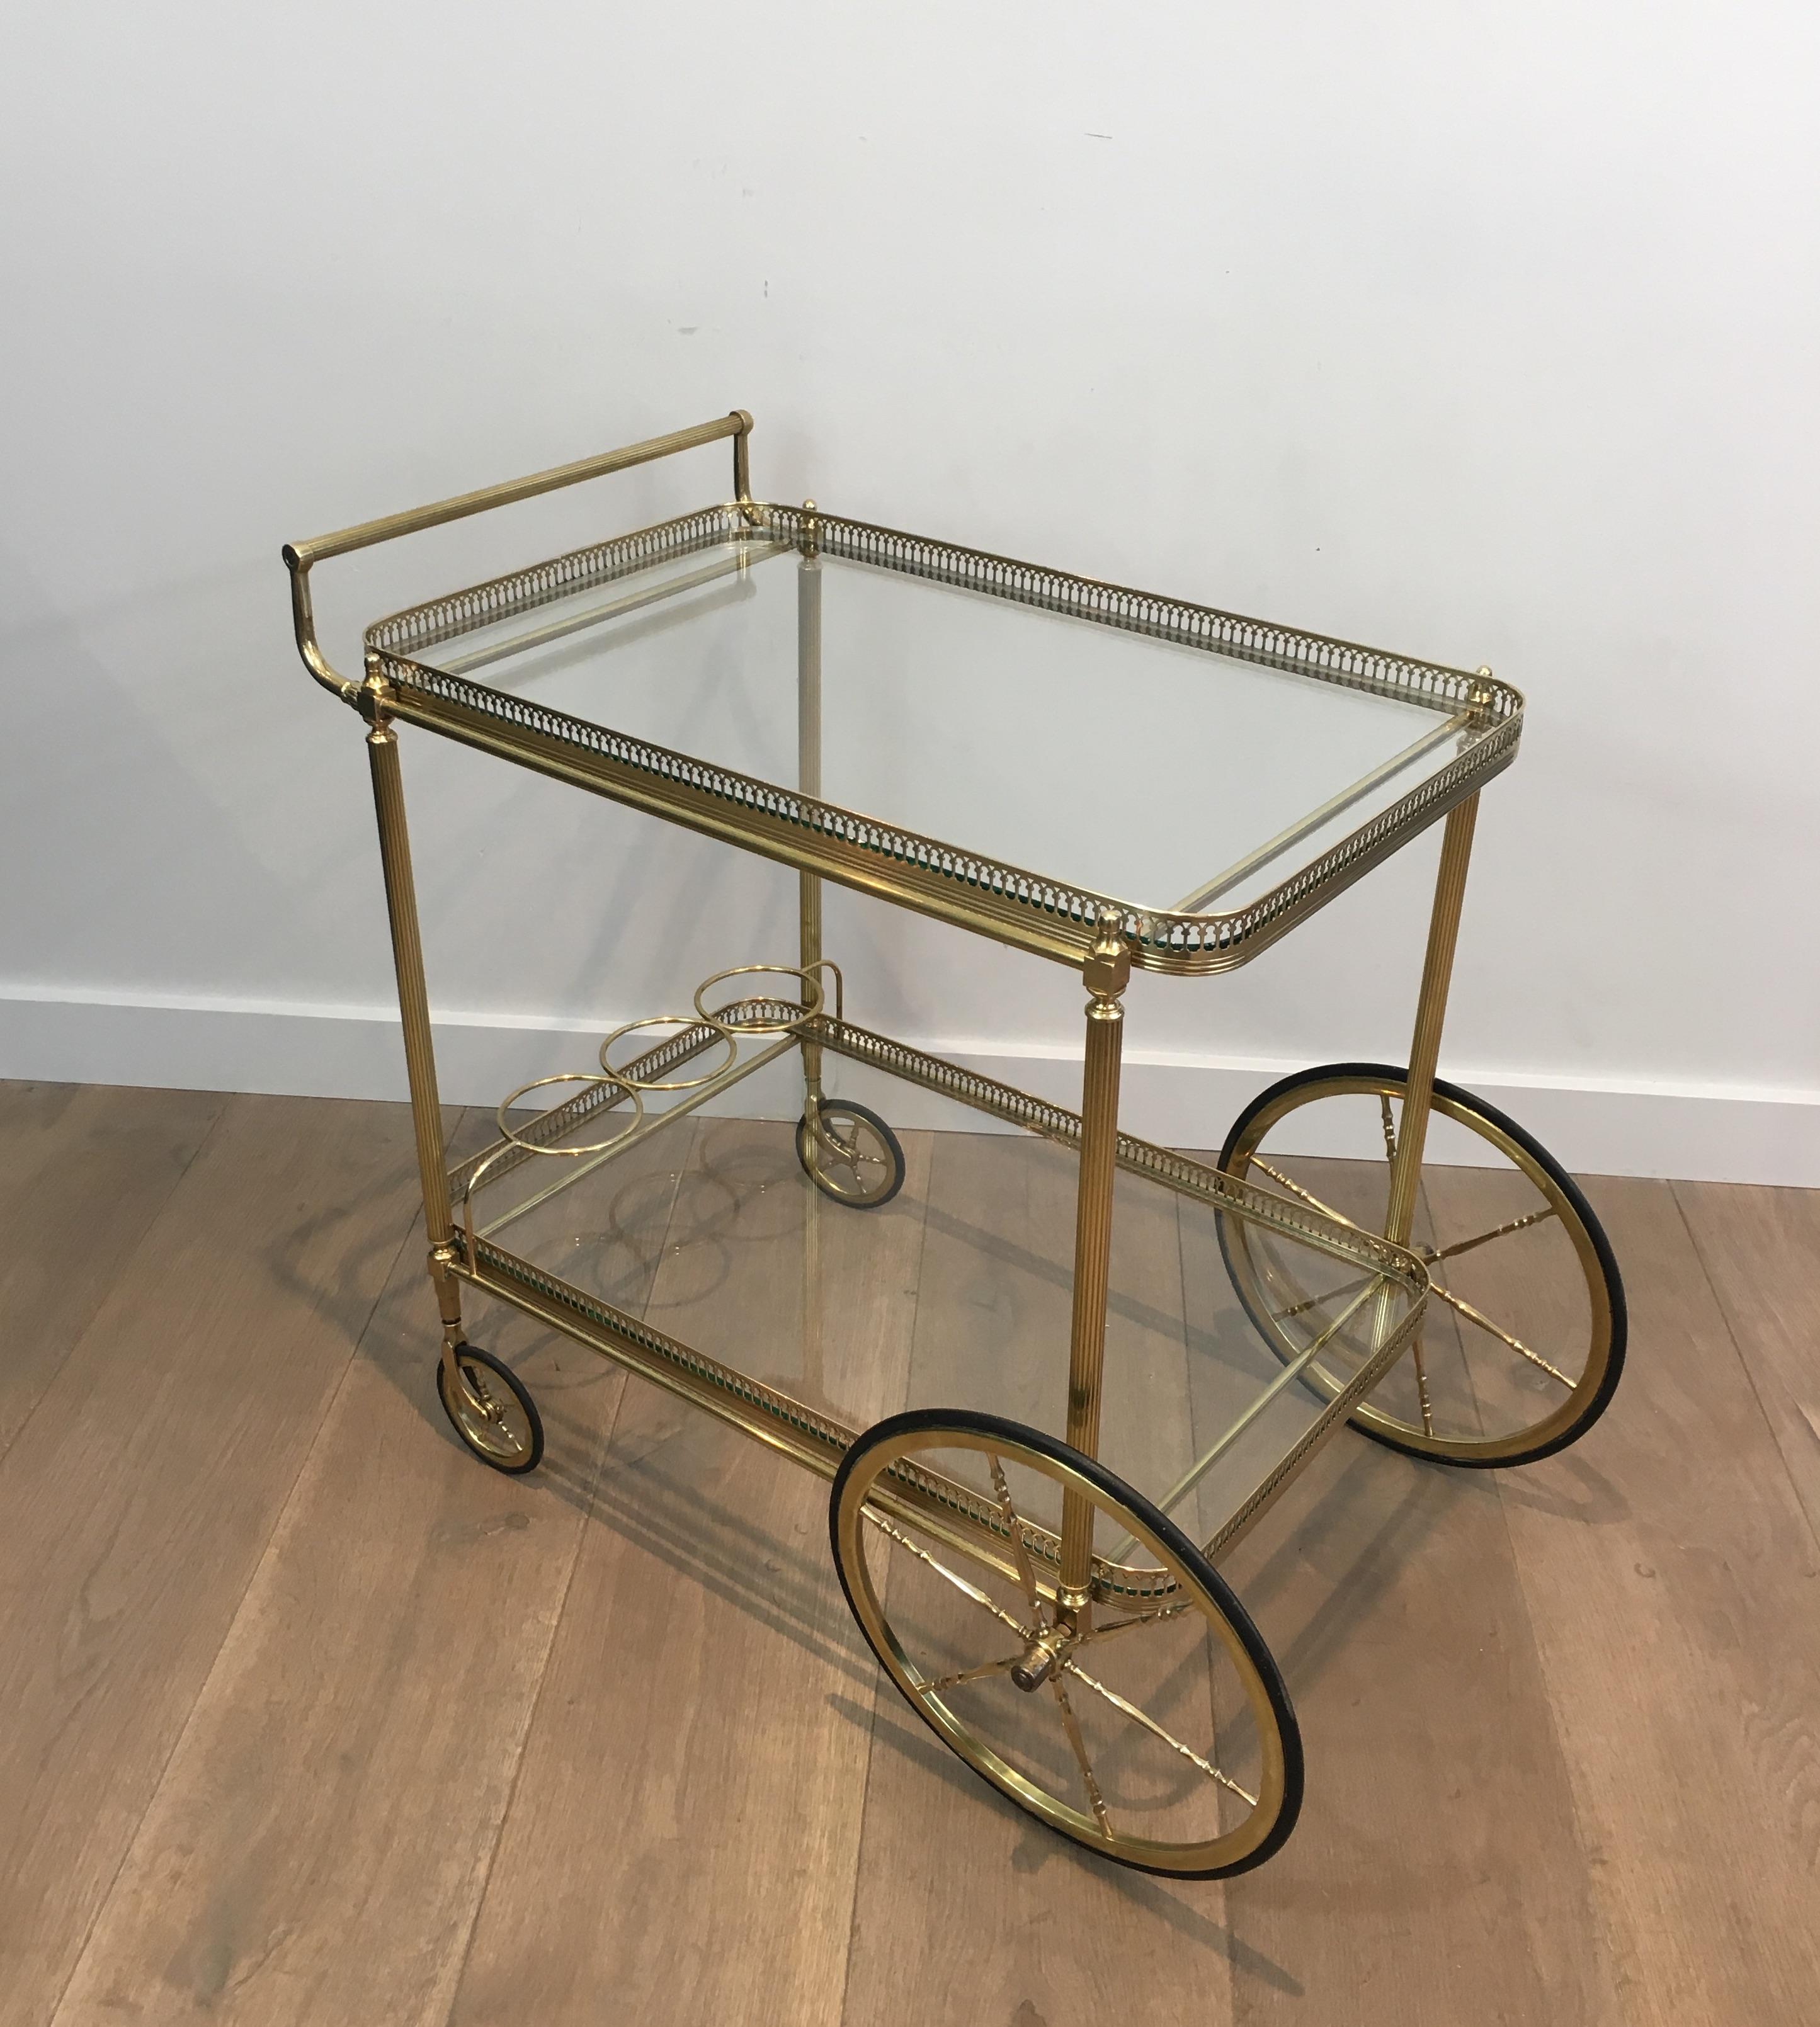 This neoclassical bar cart is made of brass with two glass shelves and two large wheels in front. This drinks trolley is a French work, circa 1940.